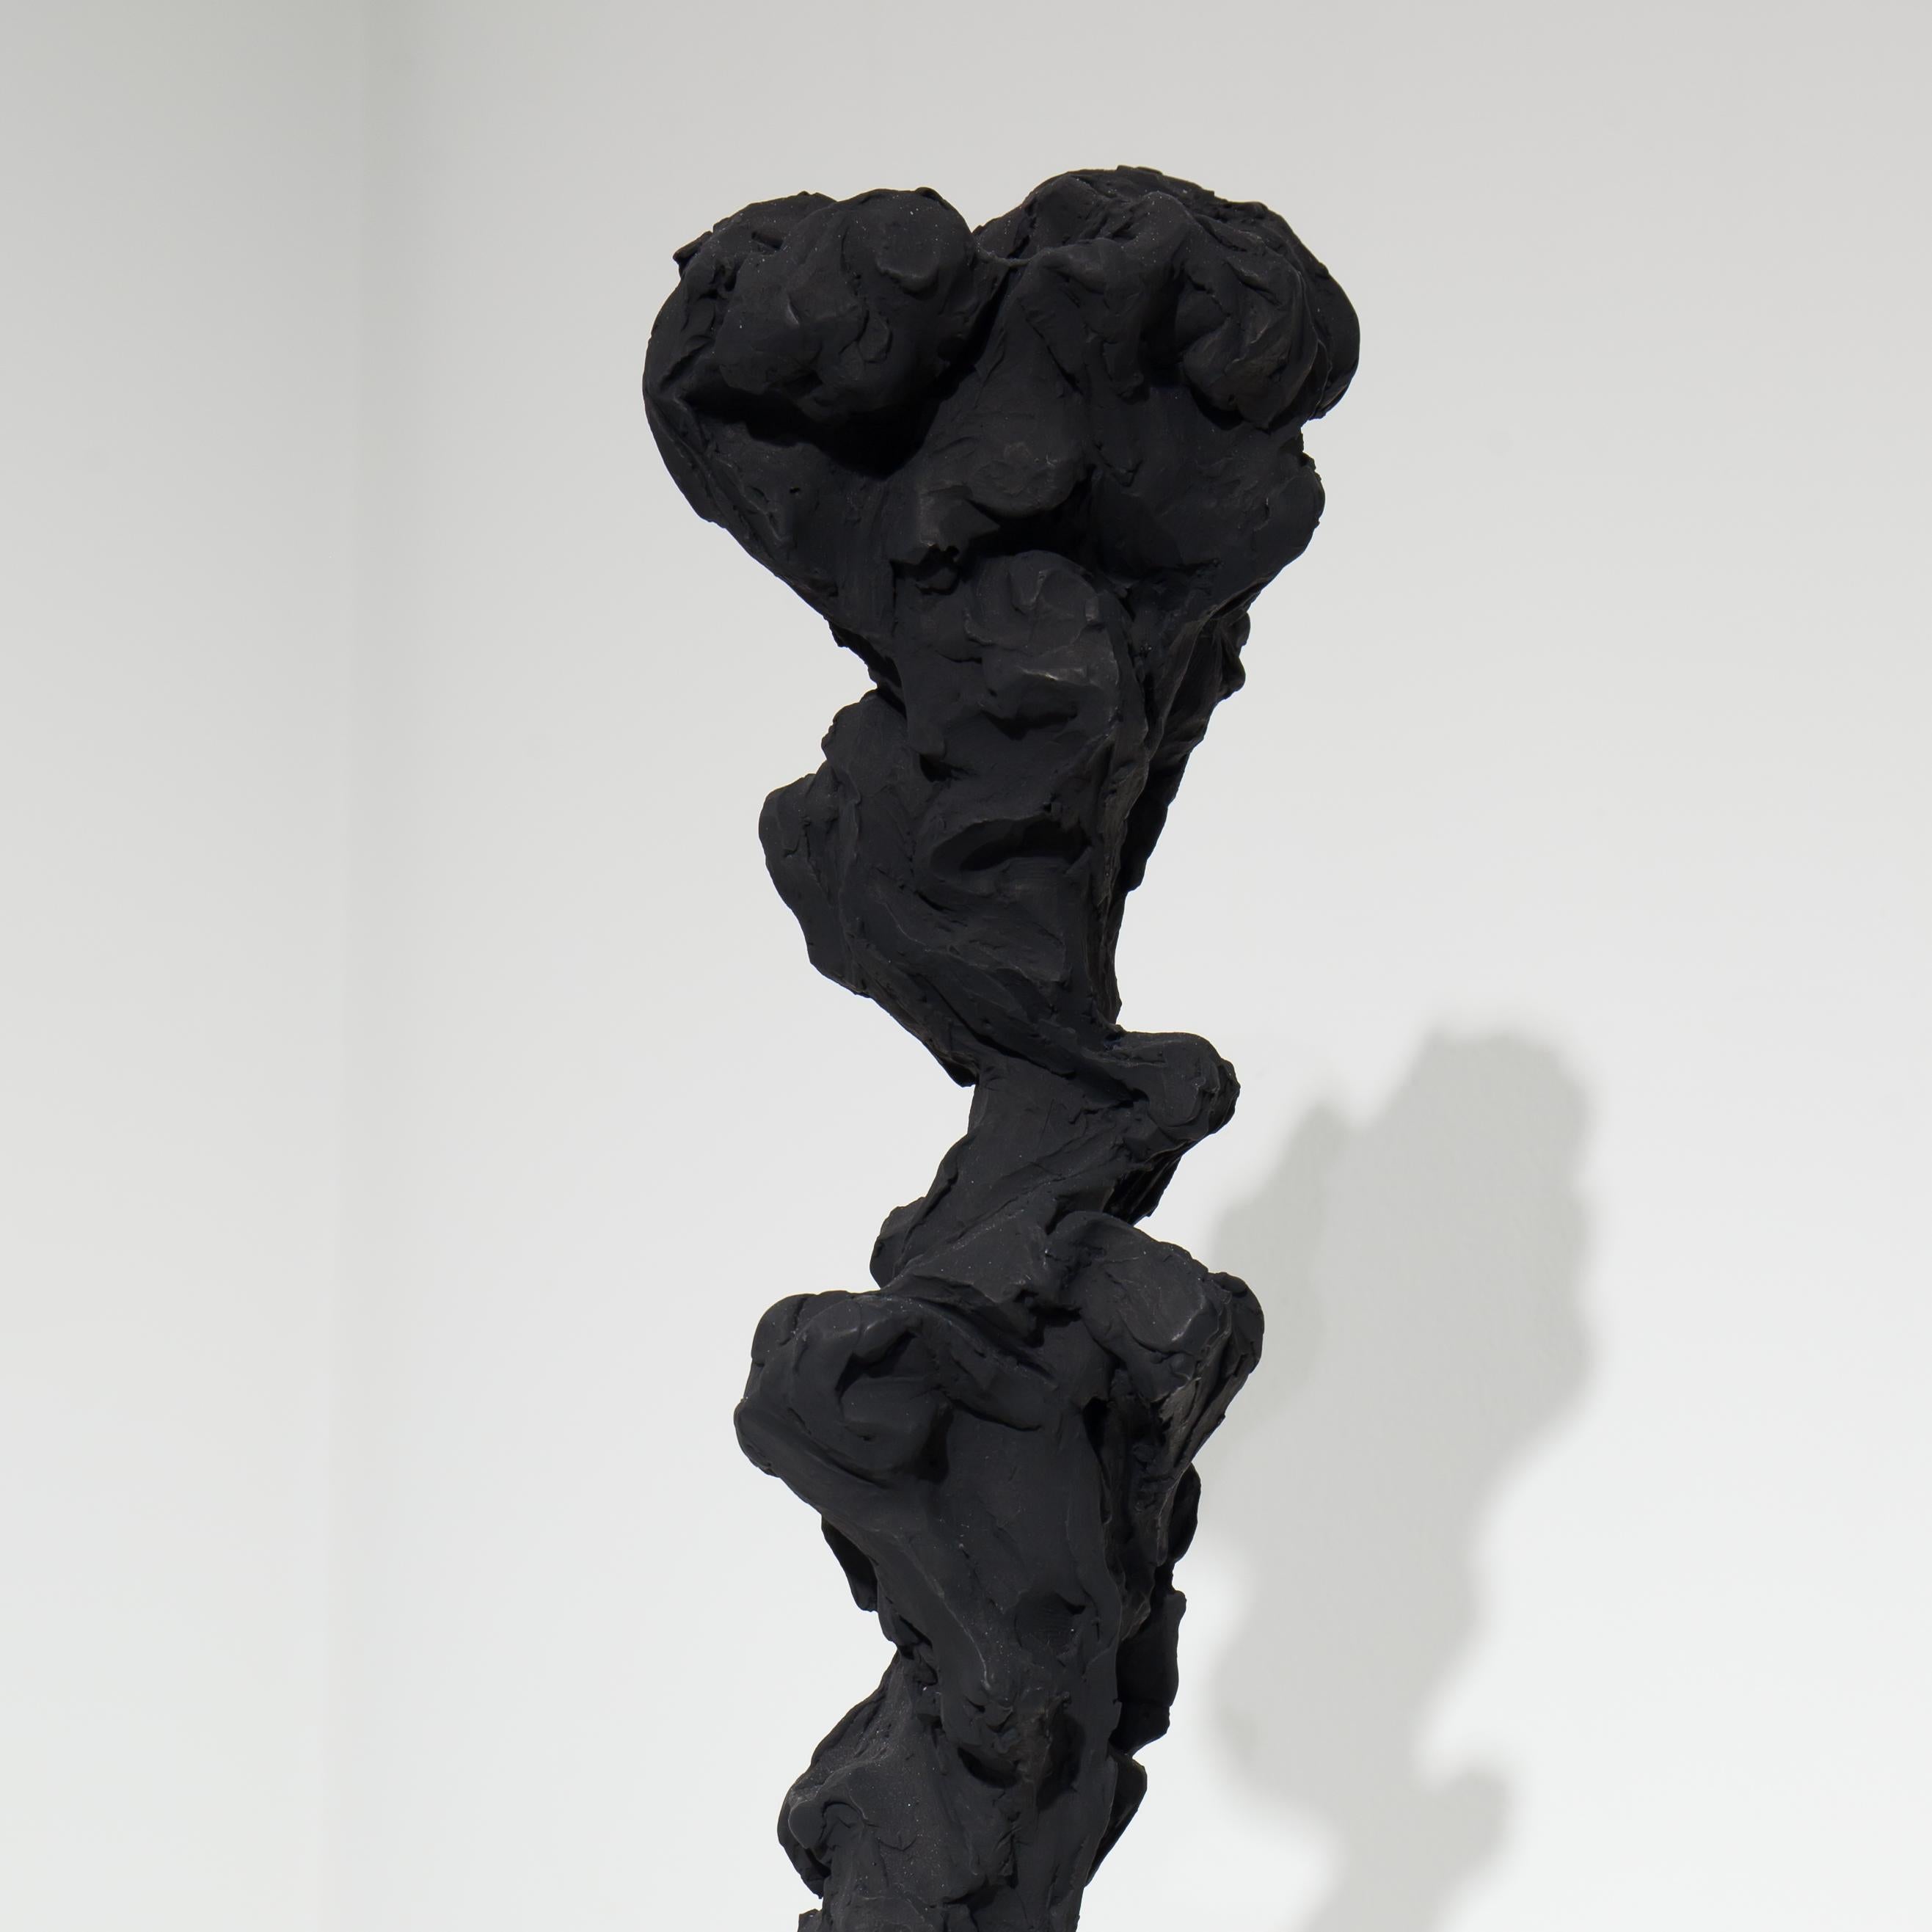 Black Totem no. 5 - Contemporary, painted bronze and Portland stone - Sculpture by Guy Haddon Grant